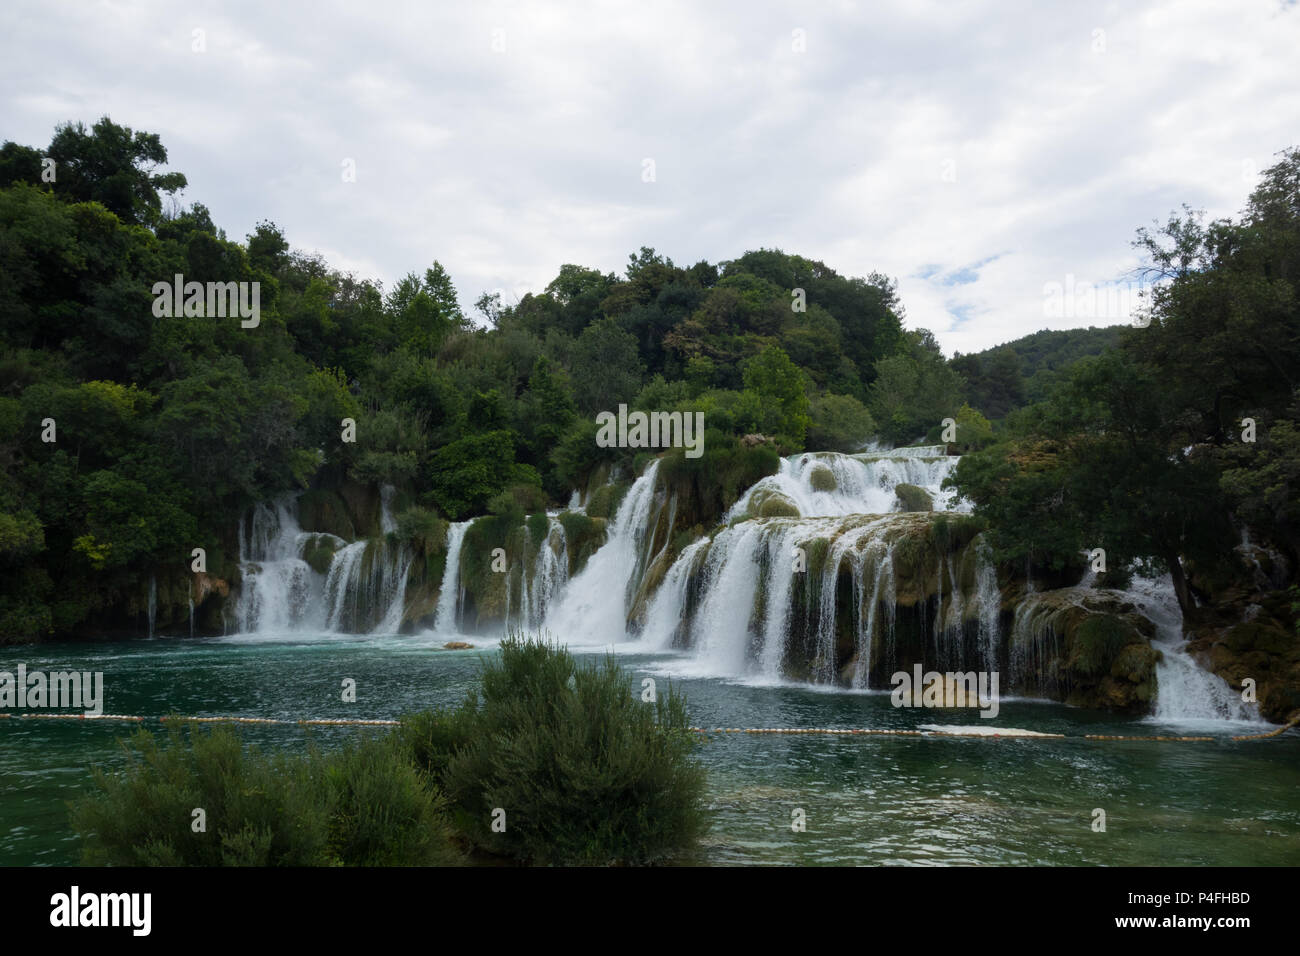 A view of one of many waterfalls in Krka national park, Croatia Stock Photo